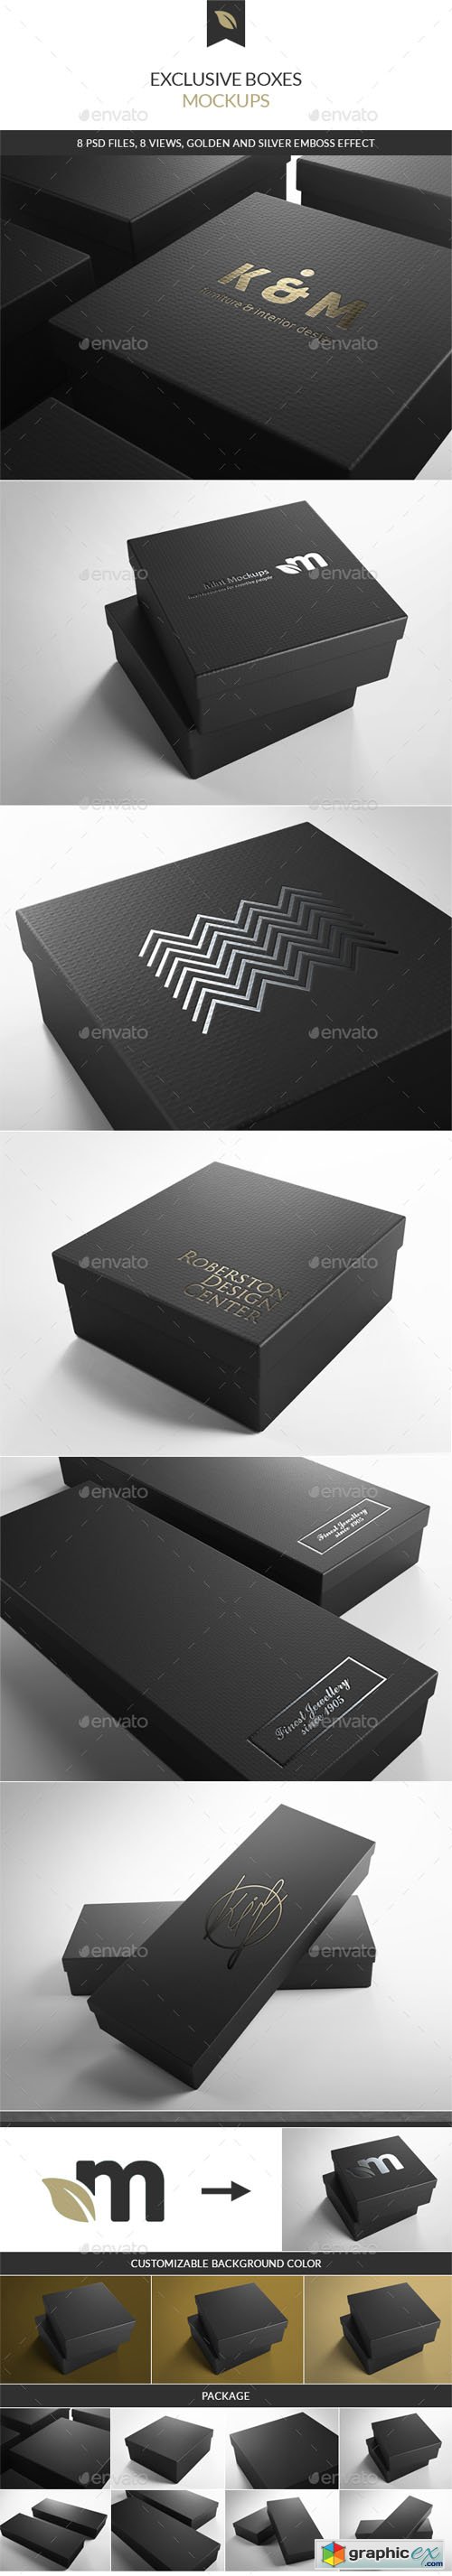 Exclusive Boxes Mockups